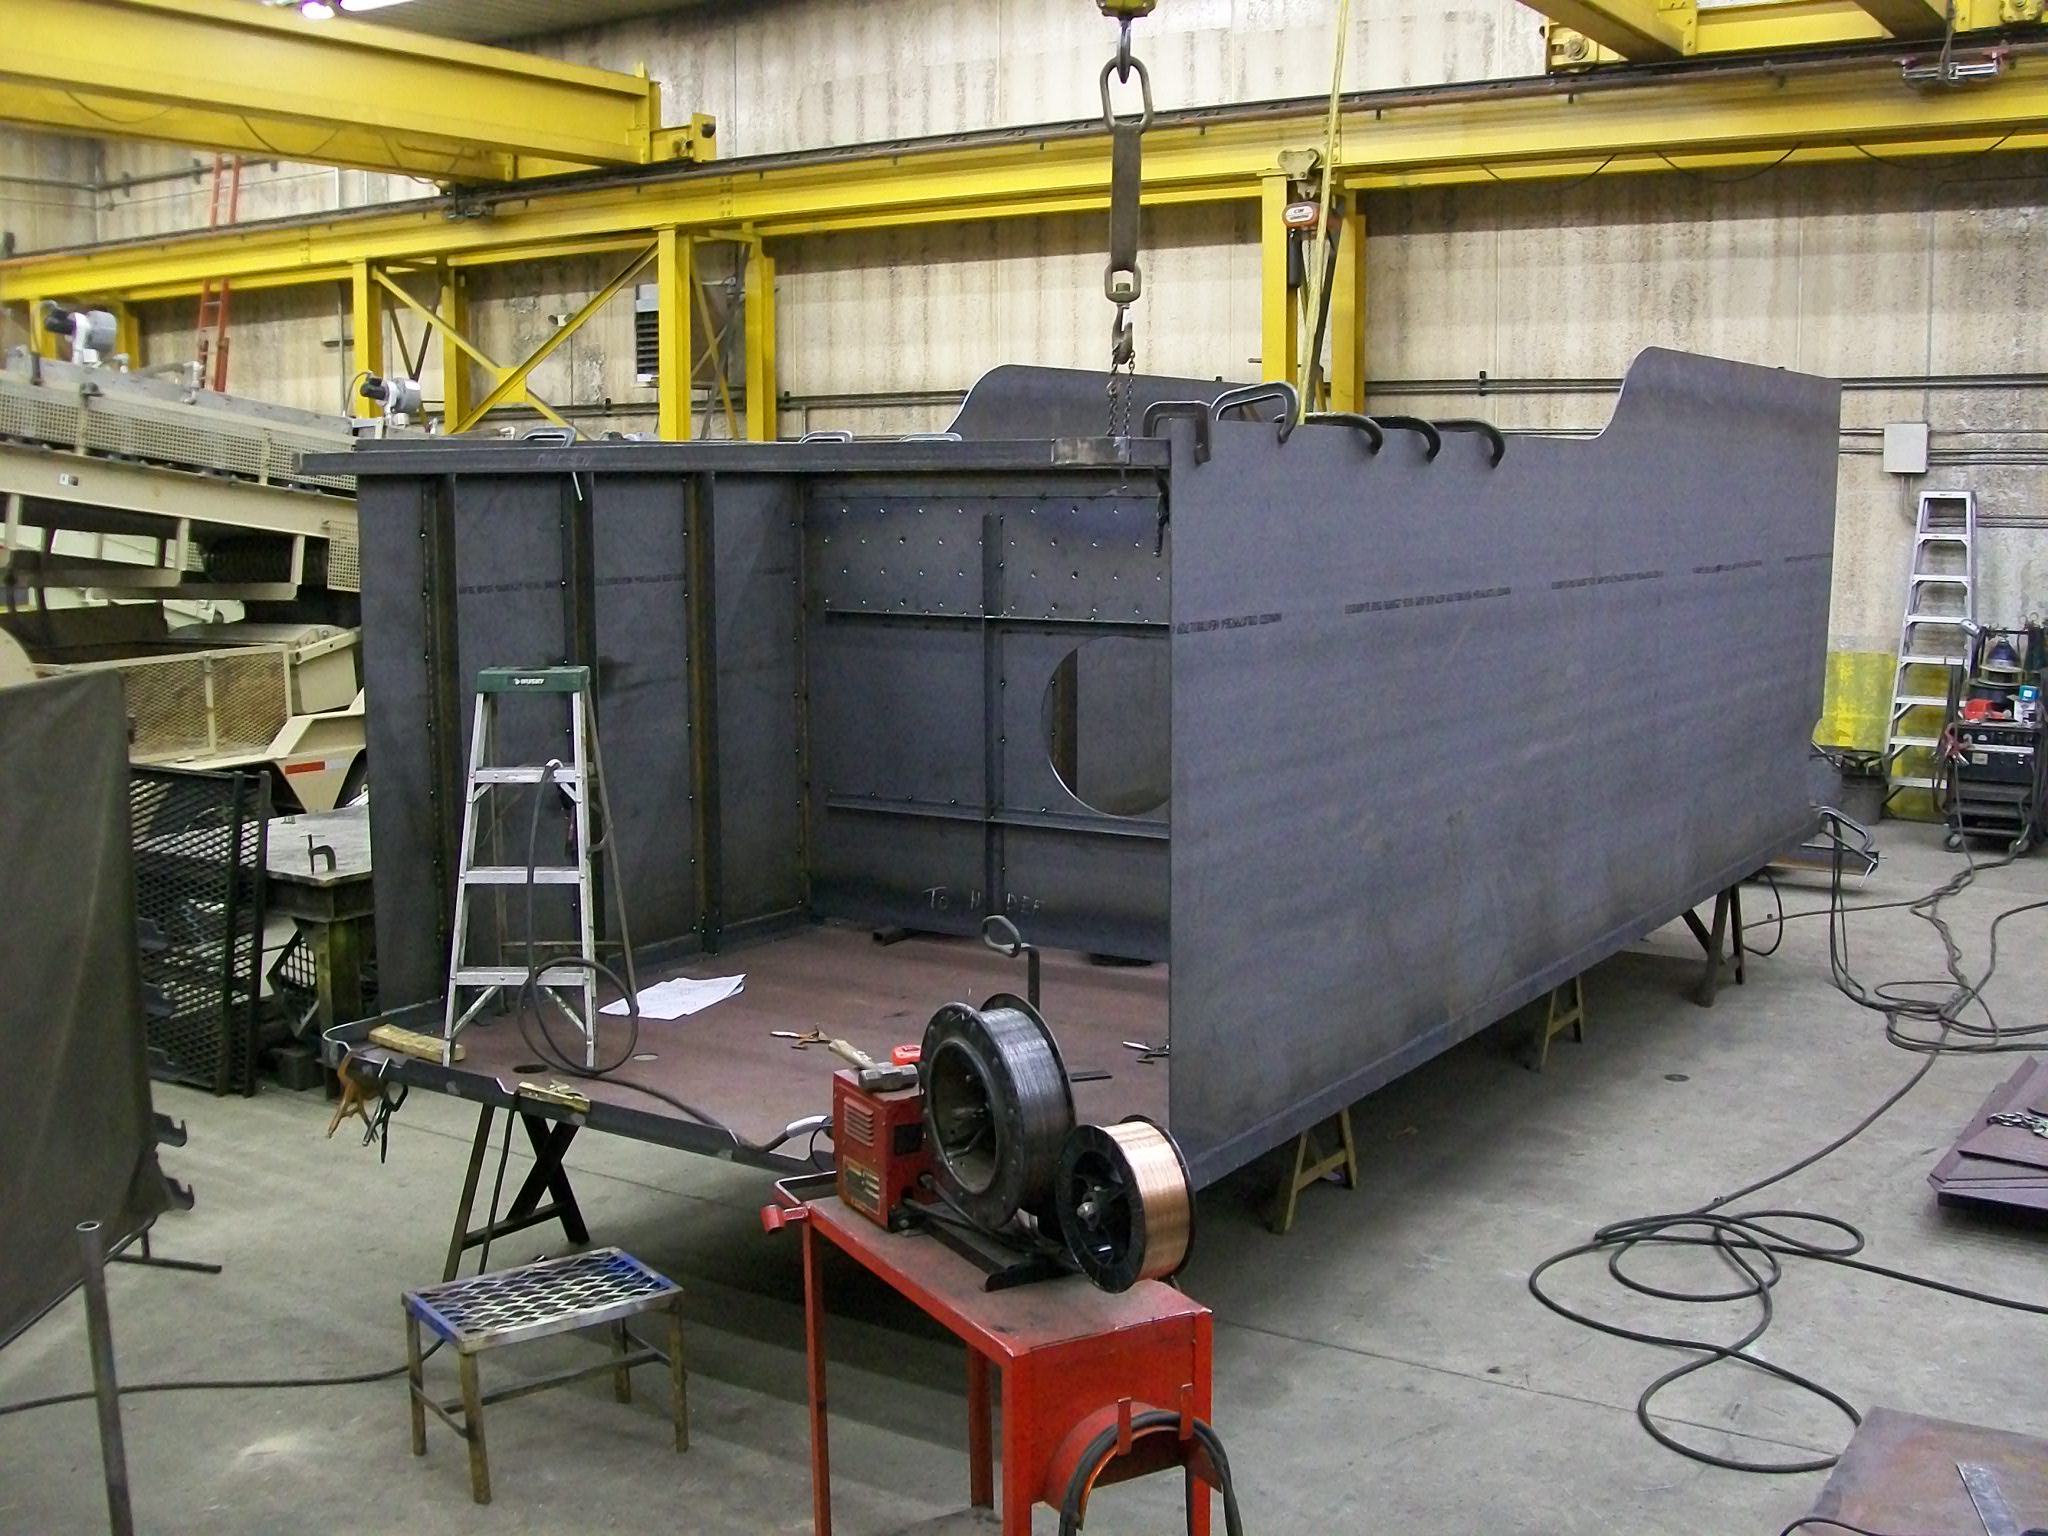 C&NW 1385 new tender tank under construction at DRM Industries. February 2012. Photos by DRM Industries